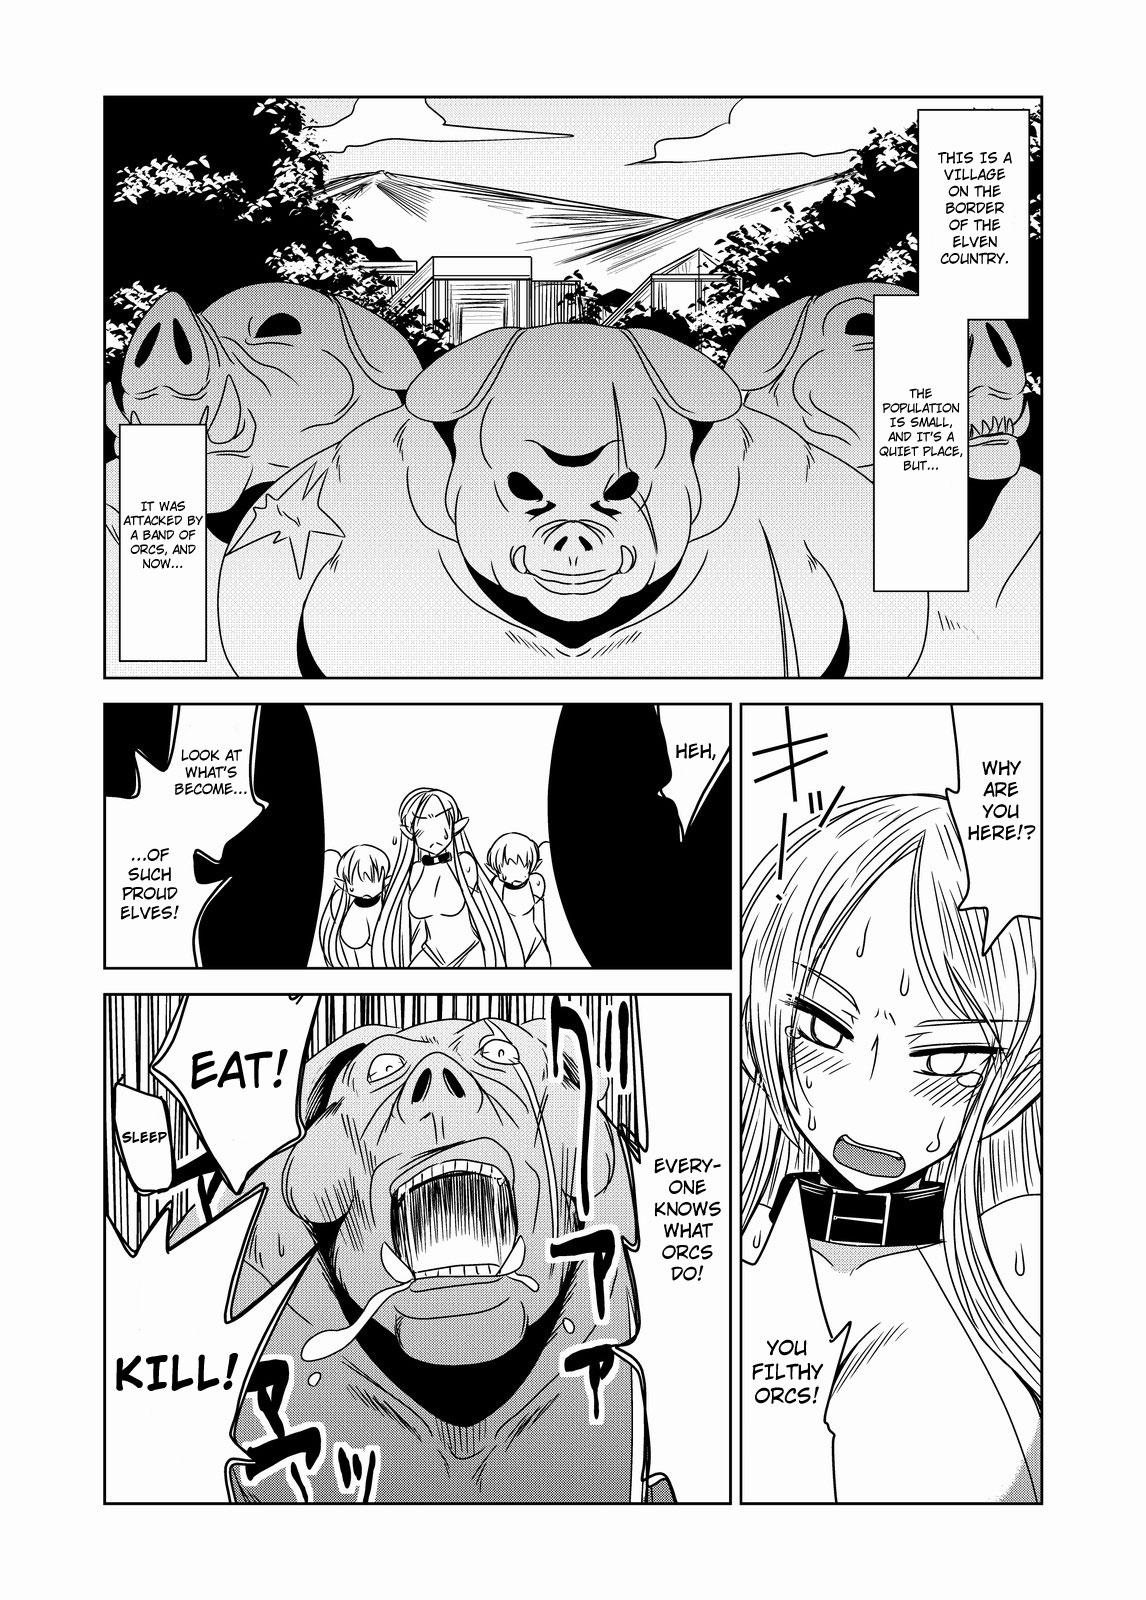 Girl Fucked Hard Orc Dakara Elf Osotta Zenin Succubus Datta wa. | We Assaulted Some Elves Because We're Orcs But It Turns Out They Were All Actually Succubi Mexico - Page 3